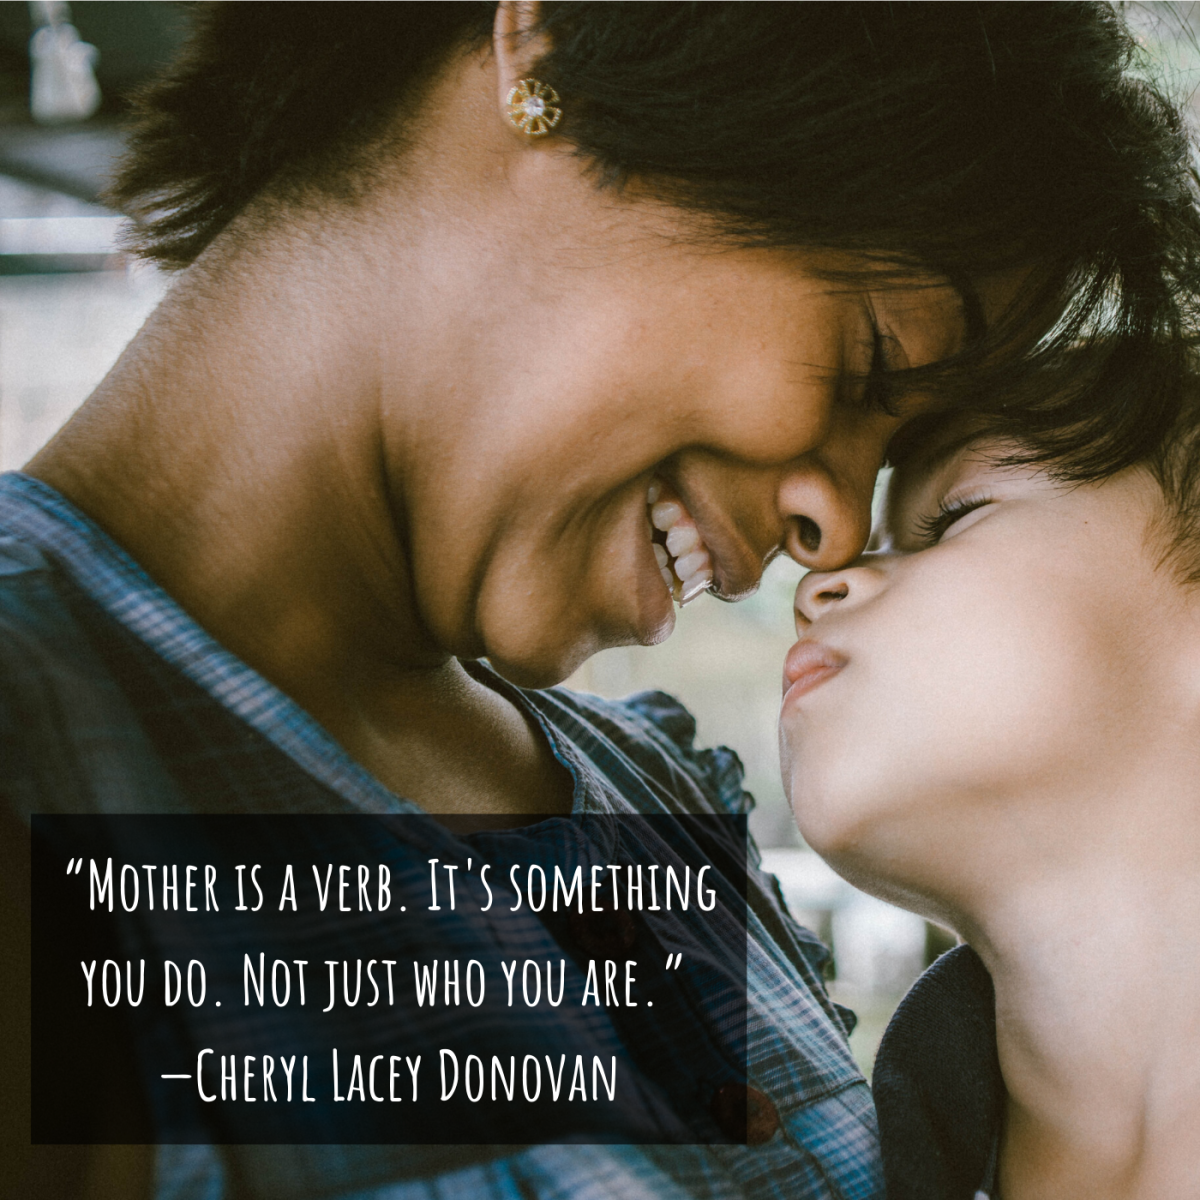 “Mother is a verb. It's something you do. Not just who you are.” —Cheryl Lacey Donovan